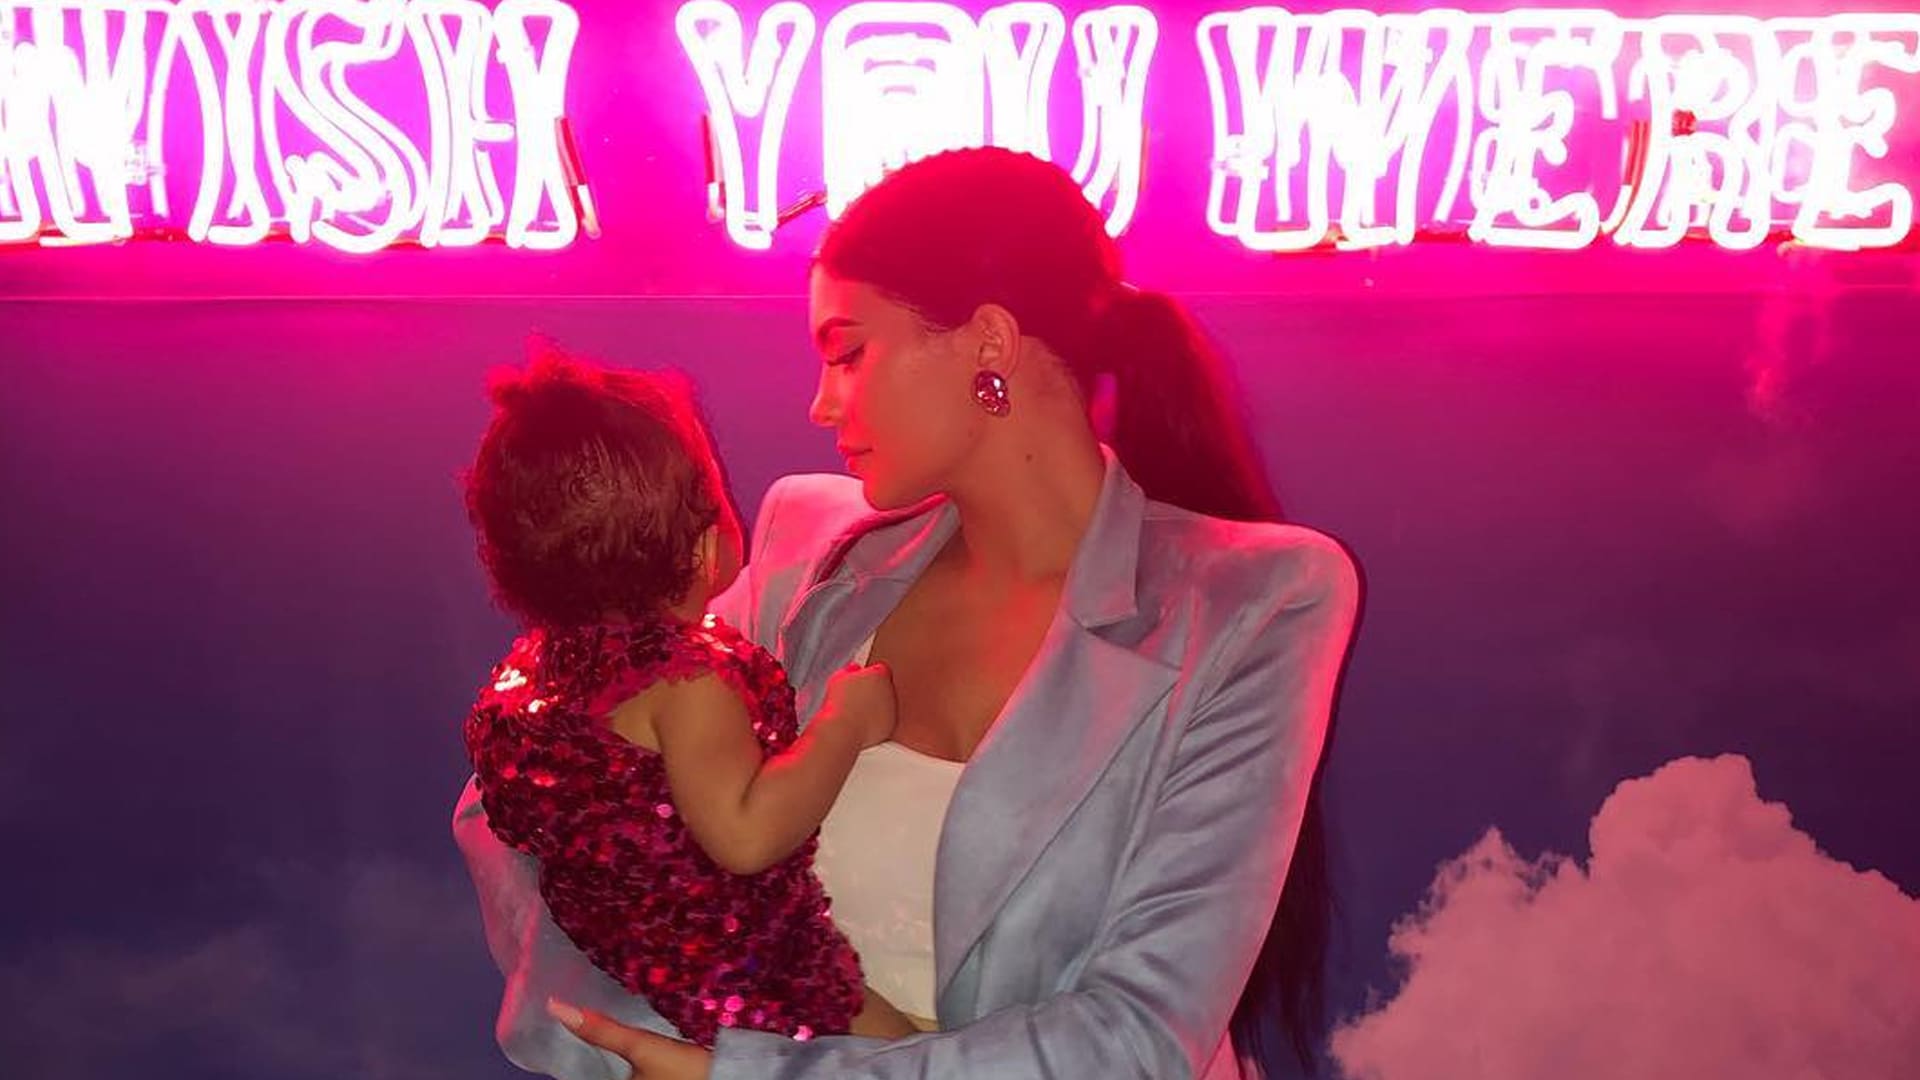 Kylie Jenner Films Herself While Doing Stormi's Hair And People Respect The Fact That She Learned How To Style It